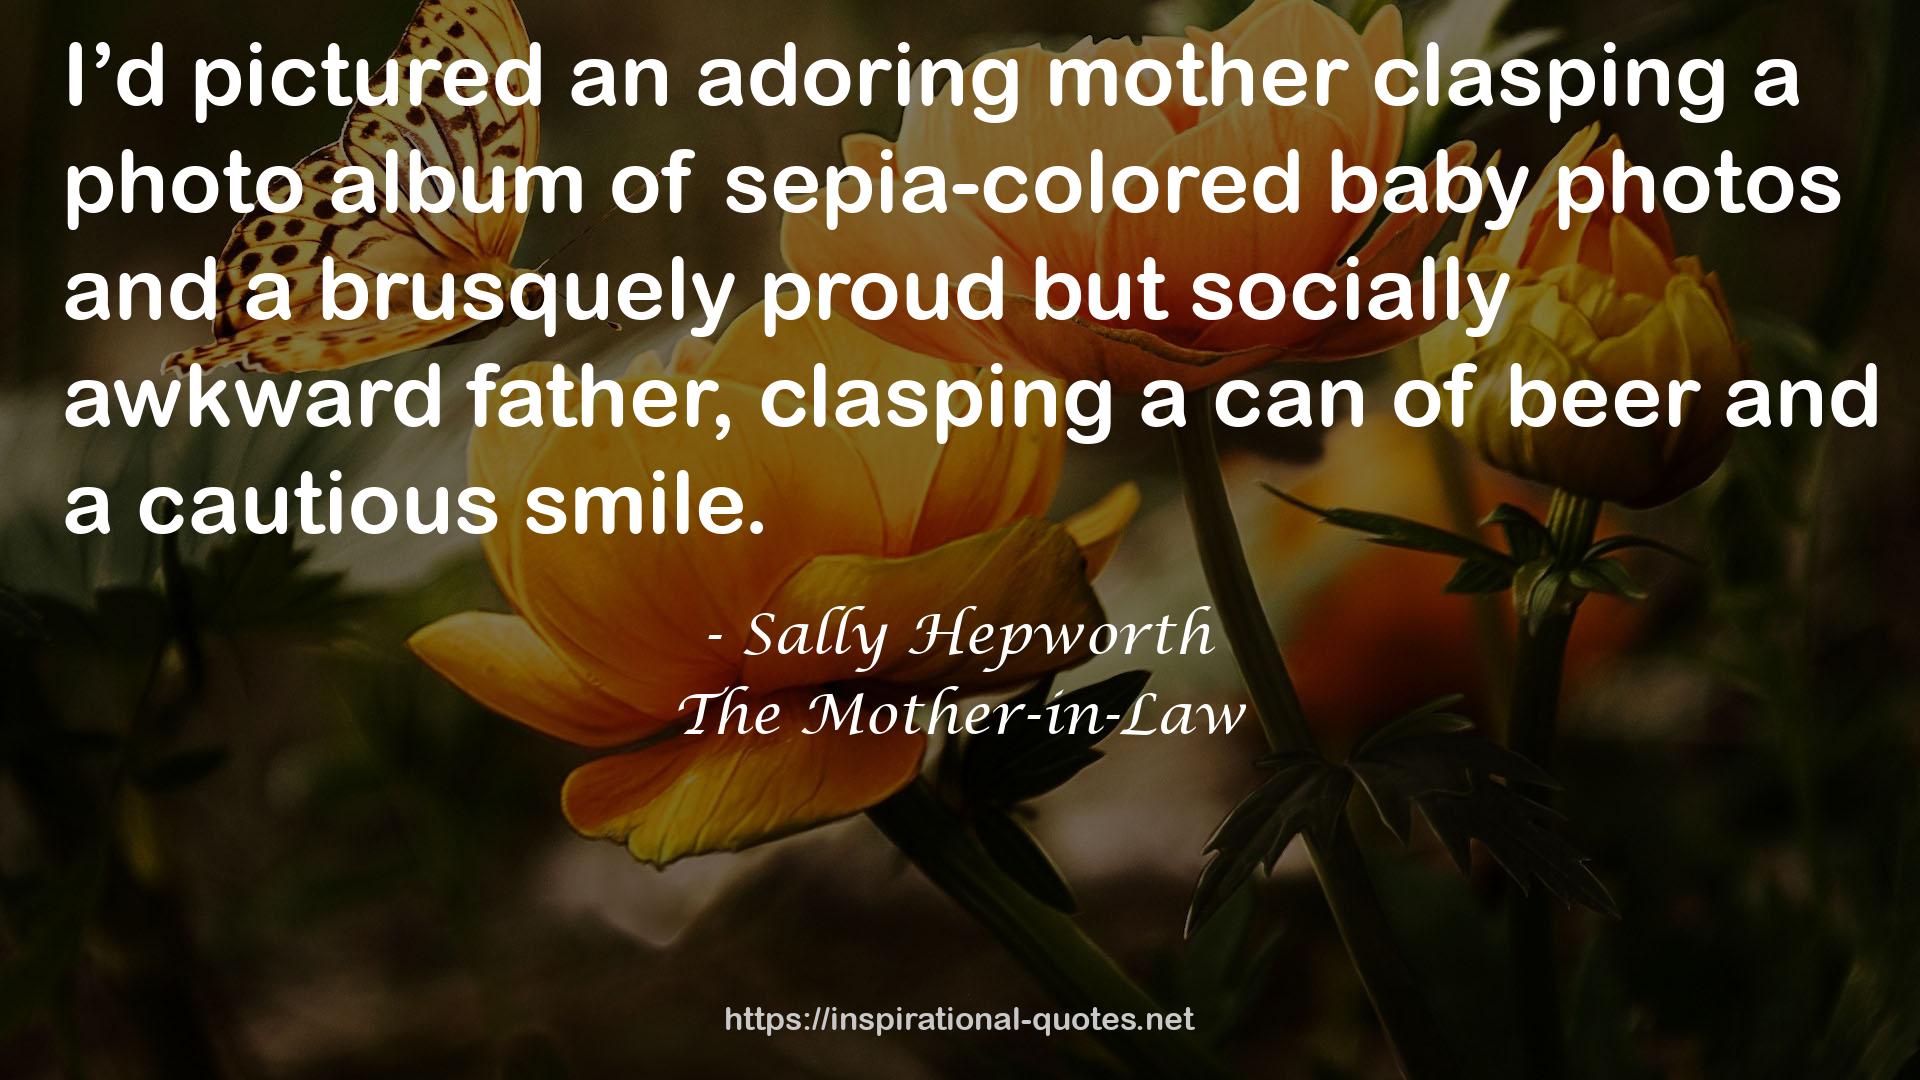 The Mother-in-Law QUOTES